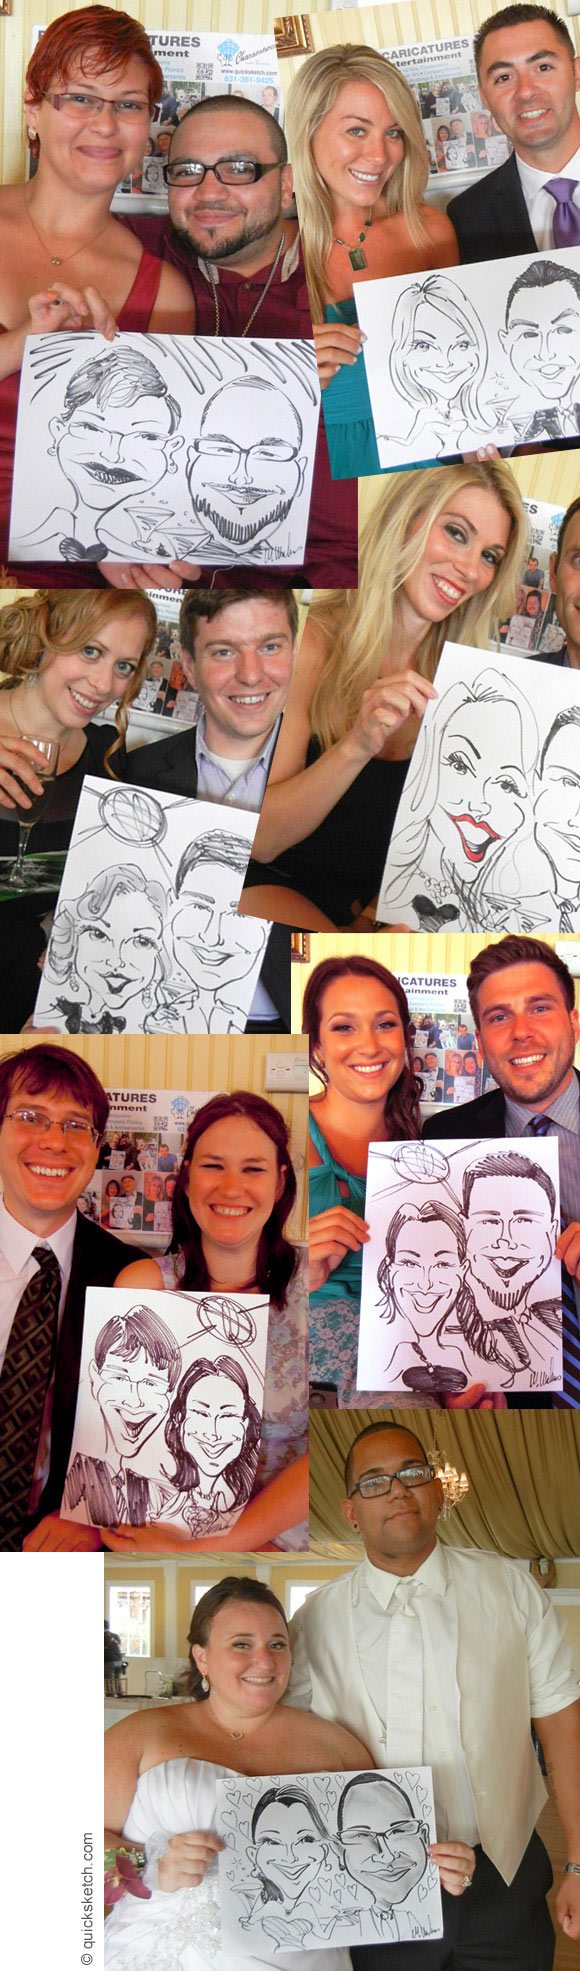 caricature artist for a wedding reception entertainment for wedding guests unusual wedding entertainment ideas USA metro ny area wedding caricatures sketch artist Bridgeview yacht club wedding caricatures caricature artist for bridal shower engagement party entertainment fun and entertaining giveaways for guests